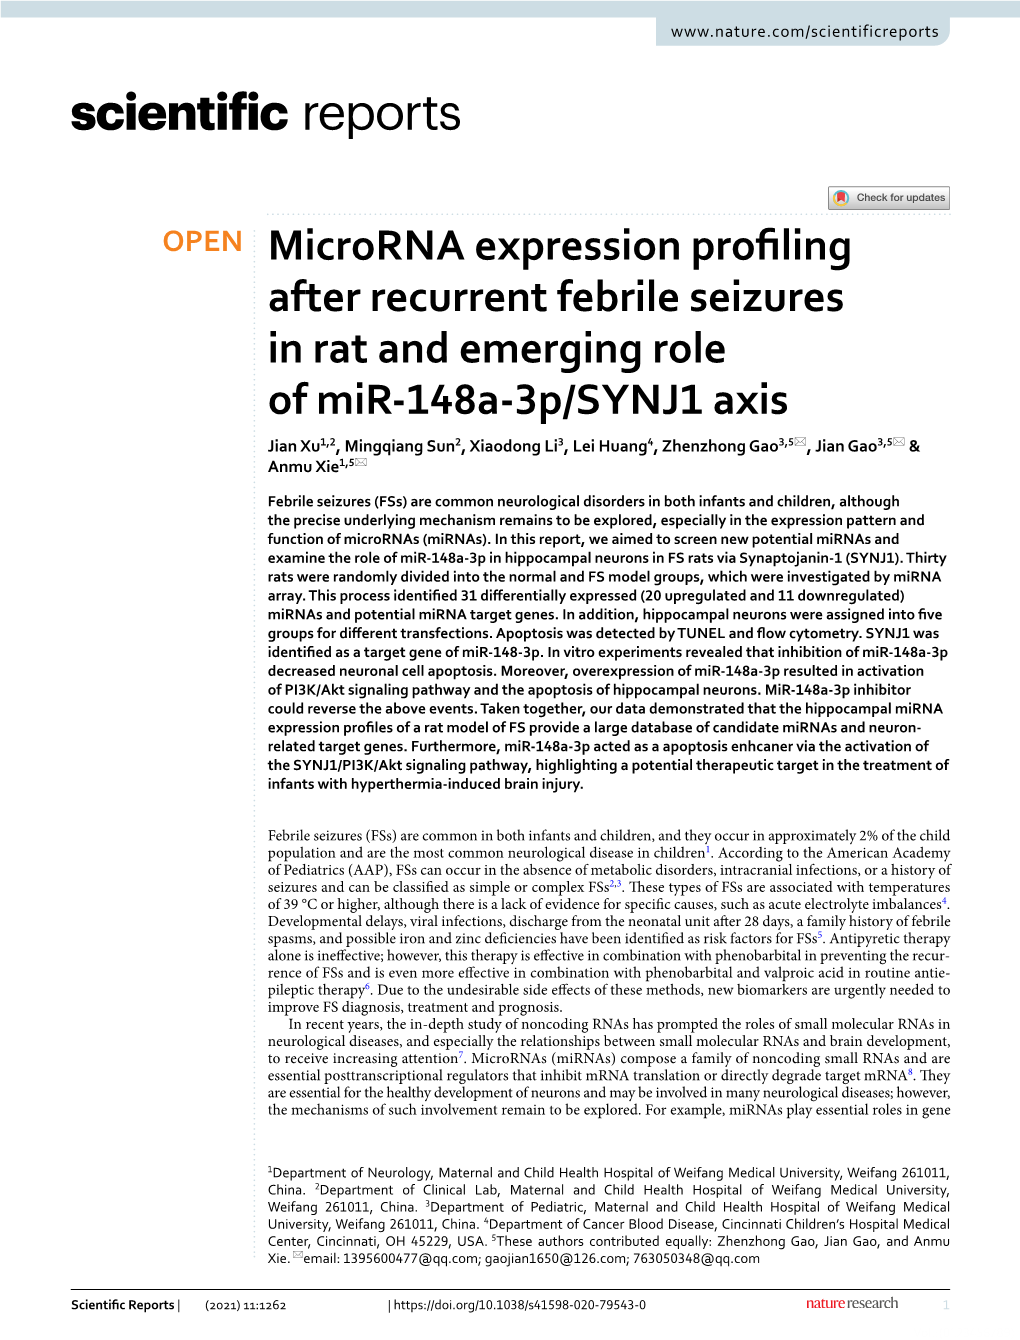 Microrna Expression Profiling After Recurrent Febrile Seizures in Rat and Emerging Role of Mir-148A-3P/SYNJ1 Axis